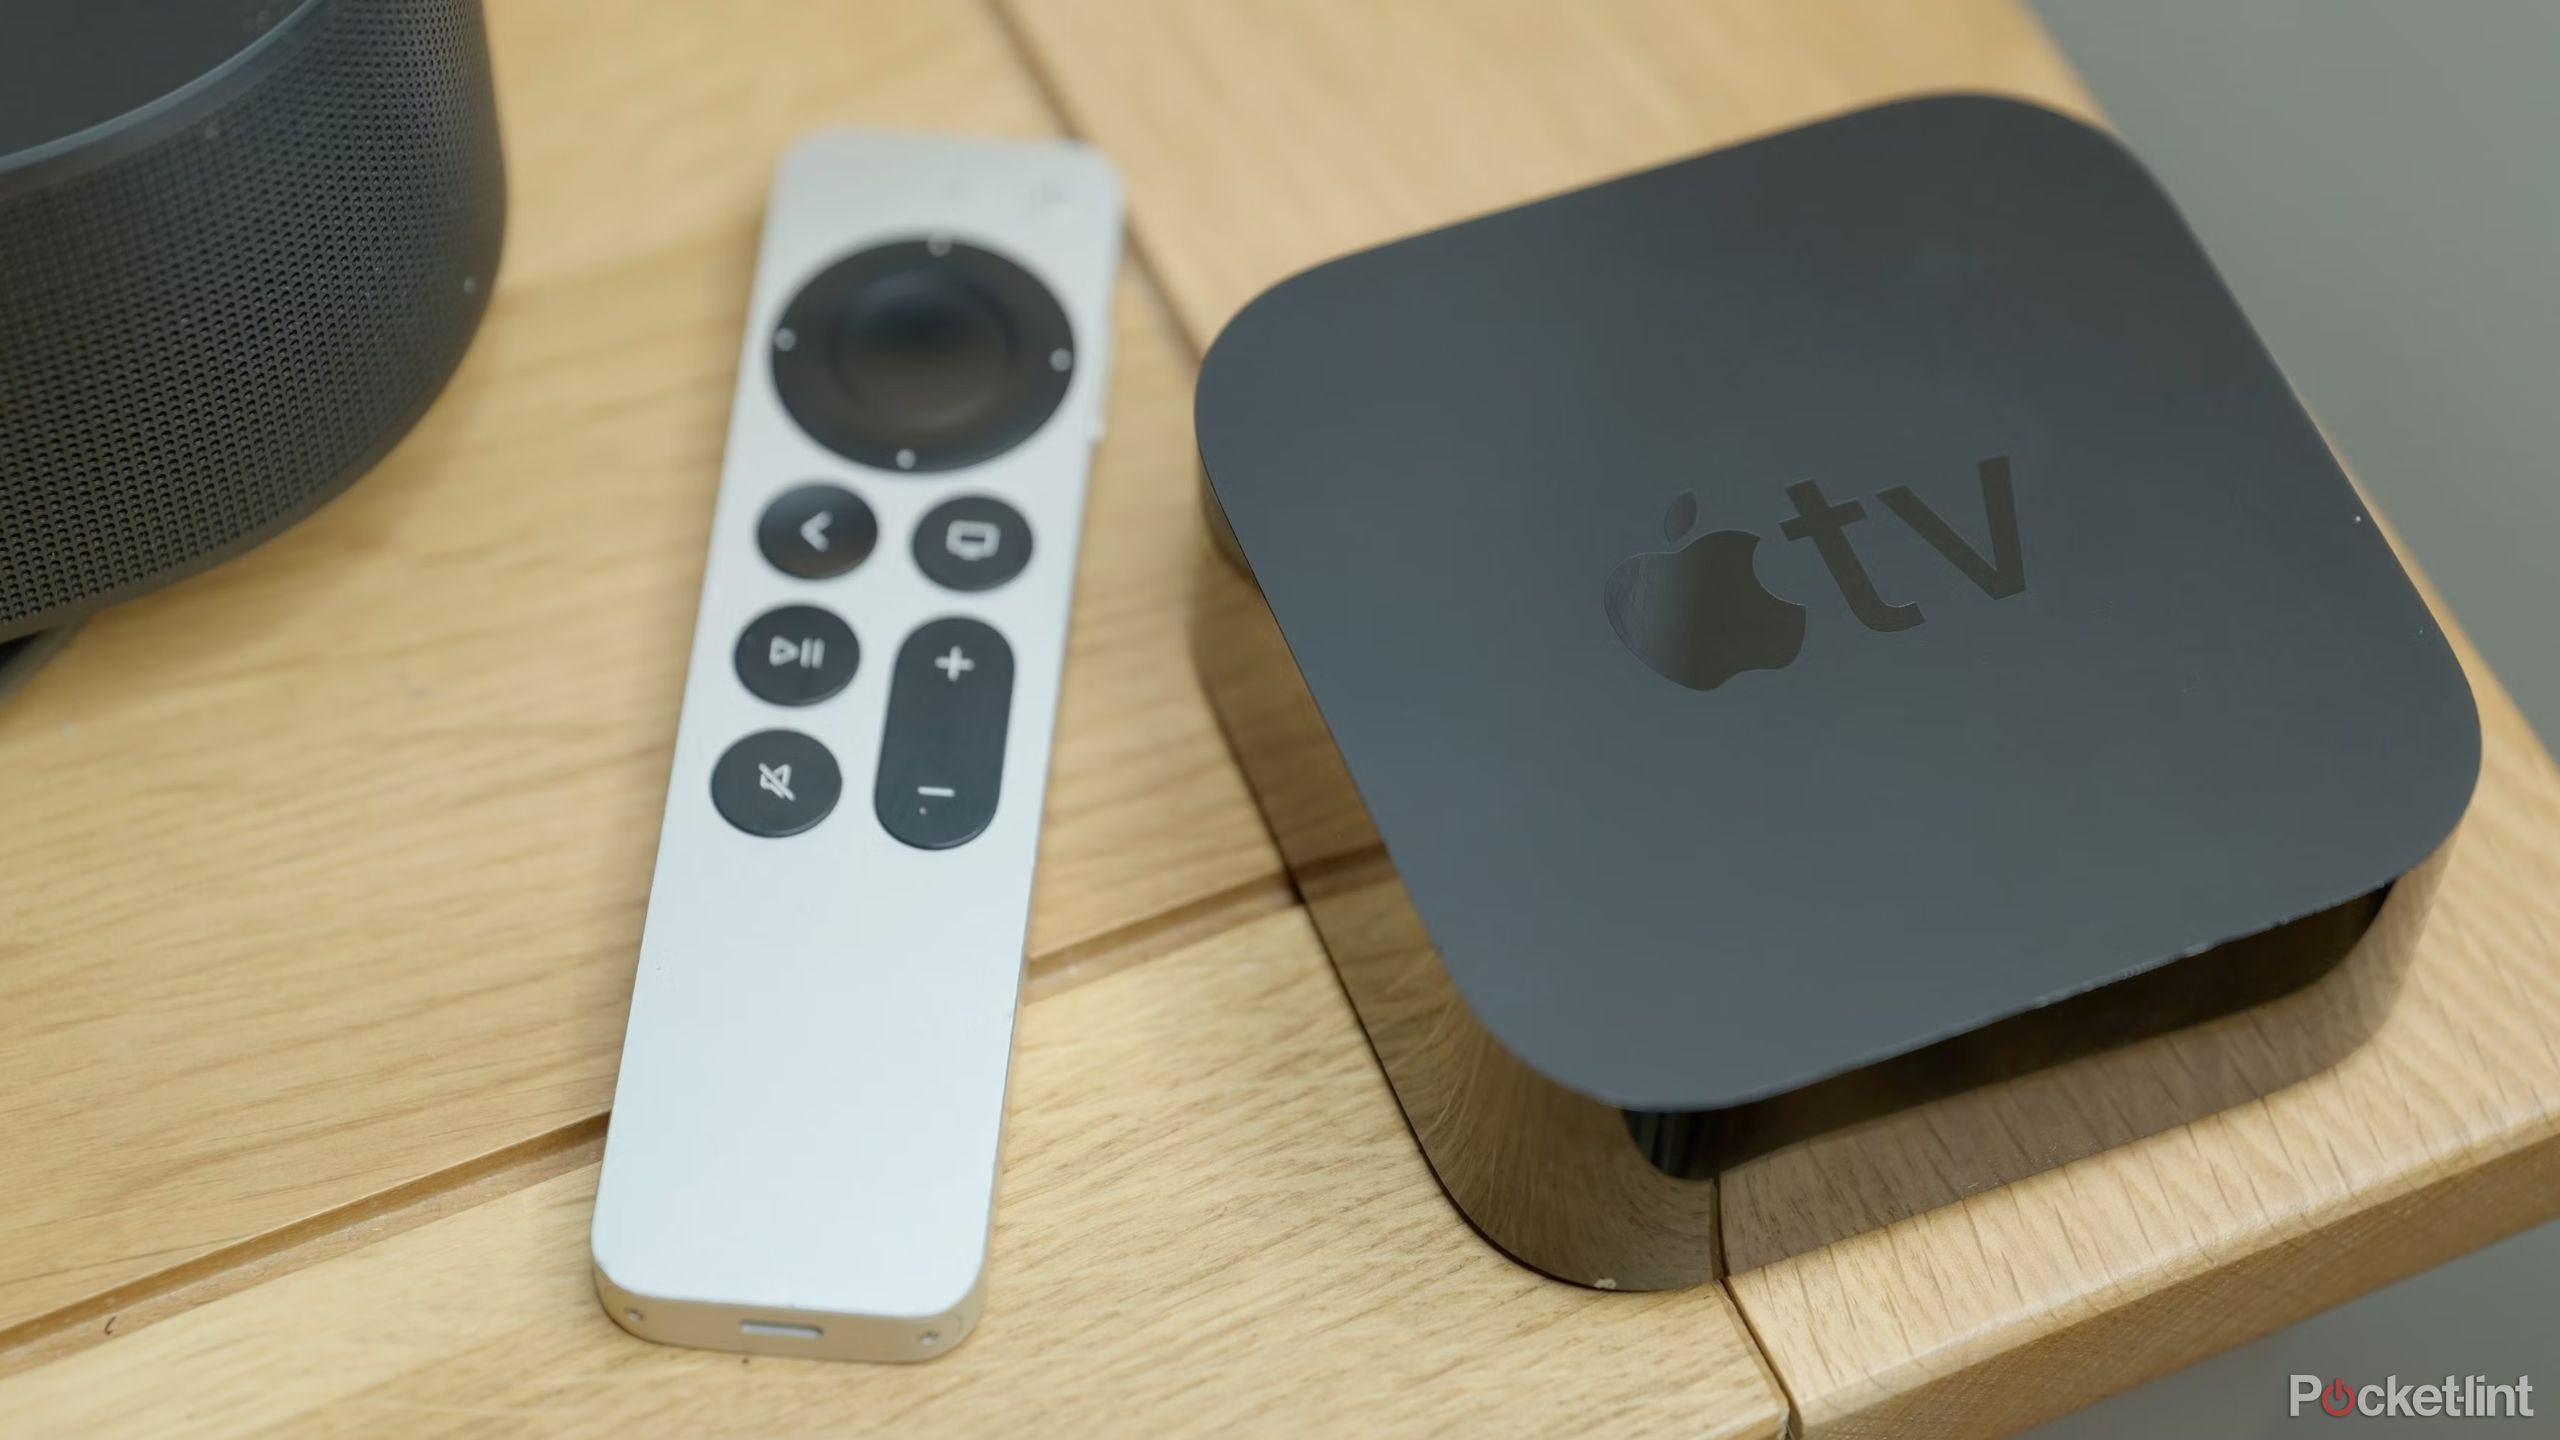 An Apple TV 4K and a Siri Remote on a table.